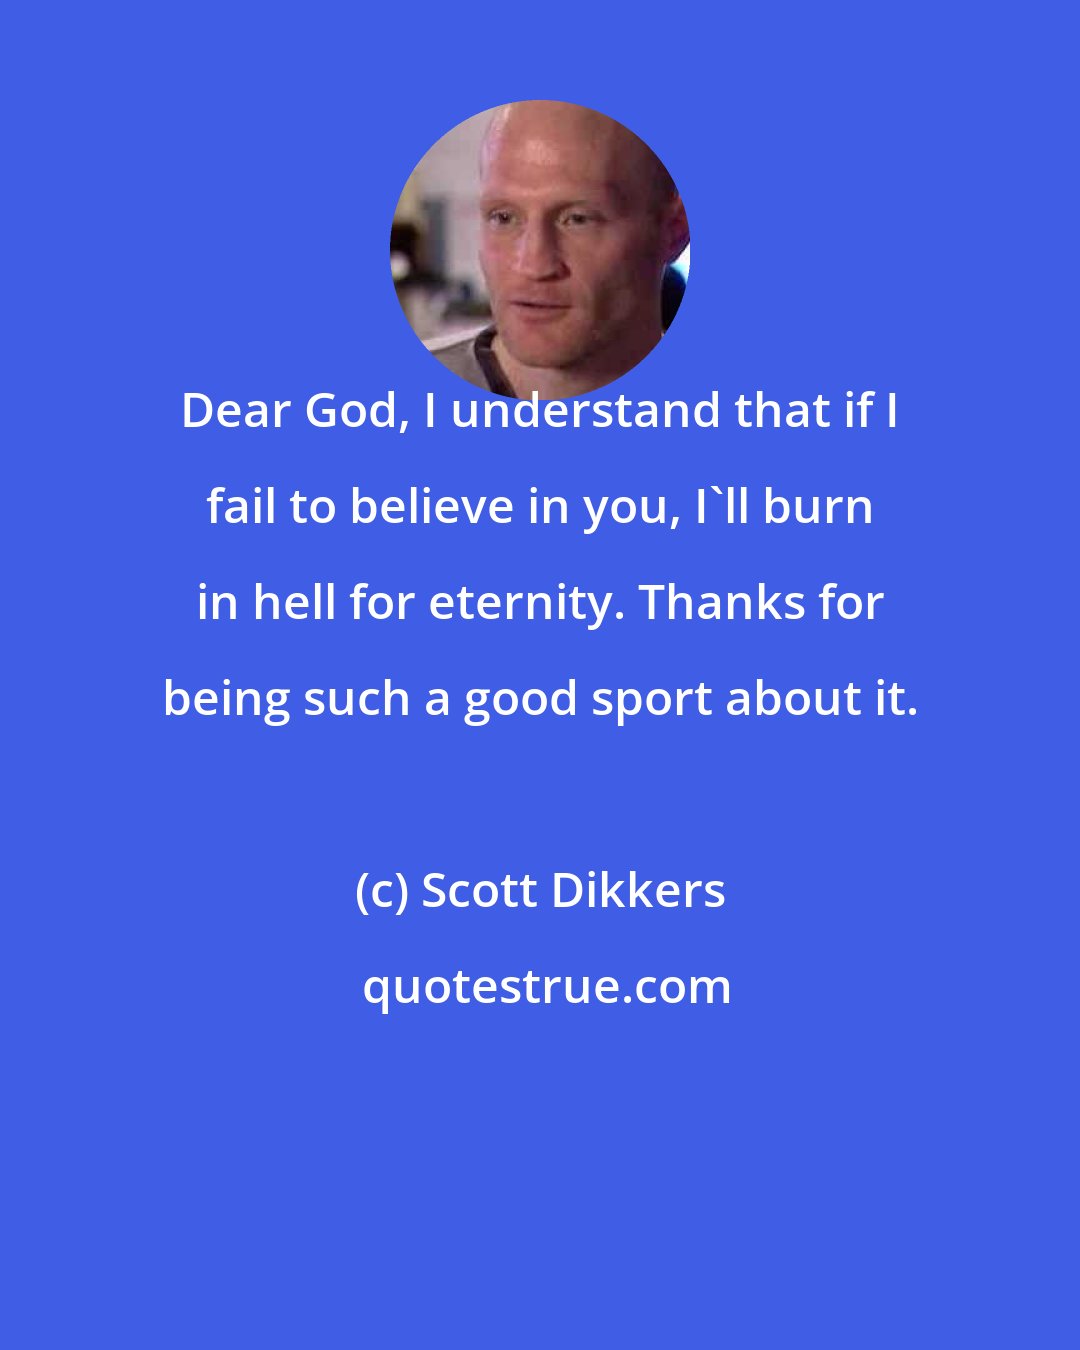 Scott Dikkers: Dear God, I understand that if I fail to believe in you, I'll burn in hell for eternity. Thanks for being such a good sport about it.